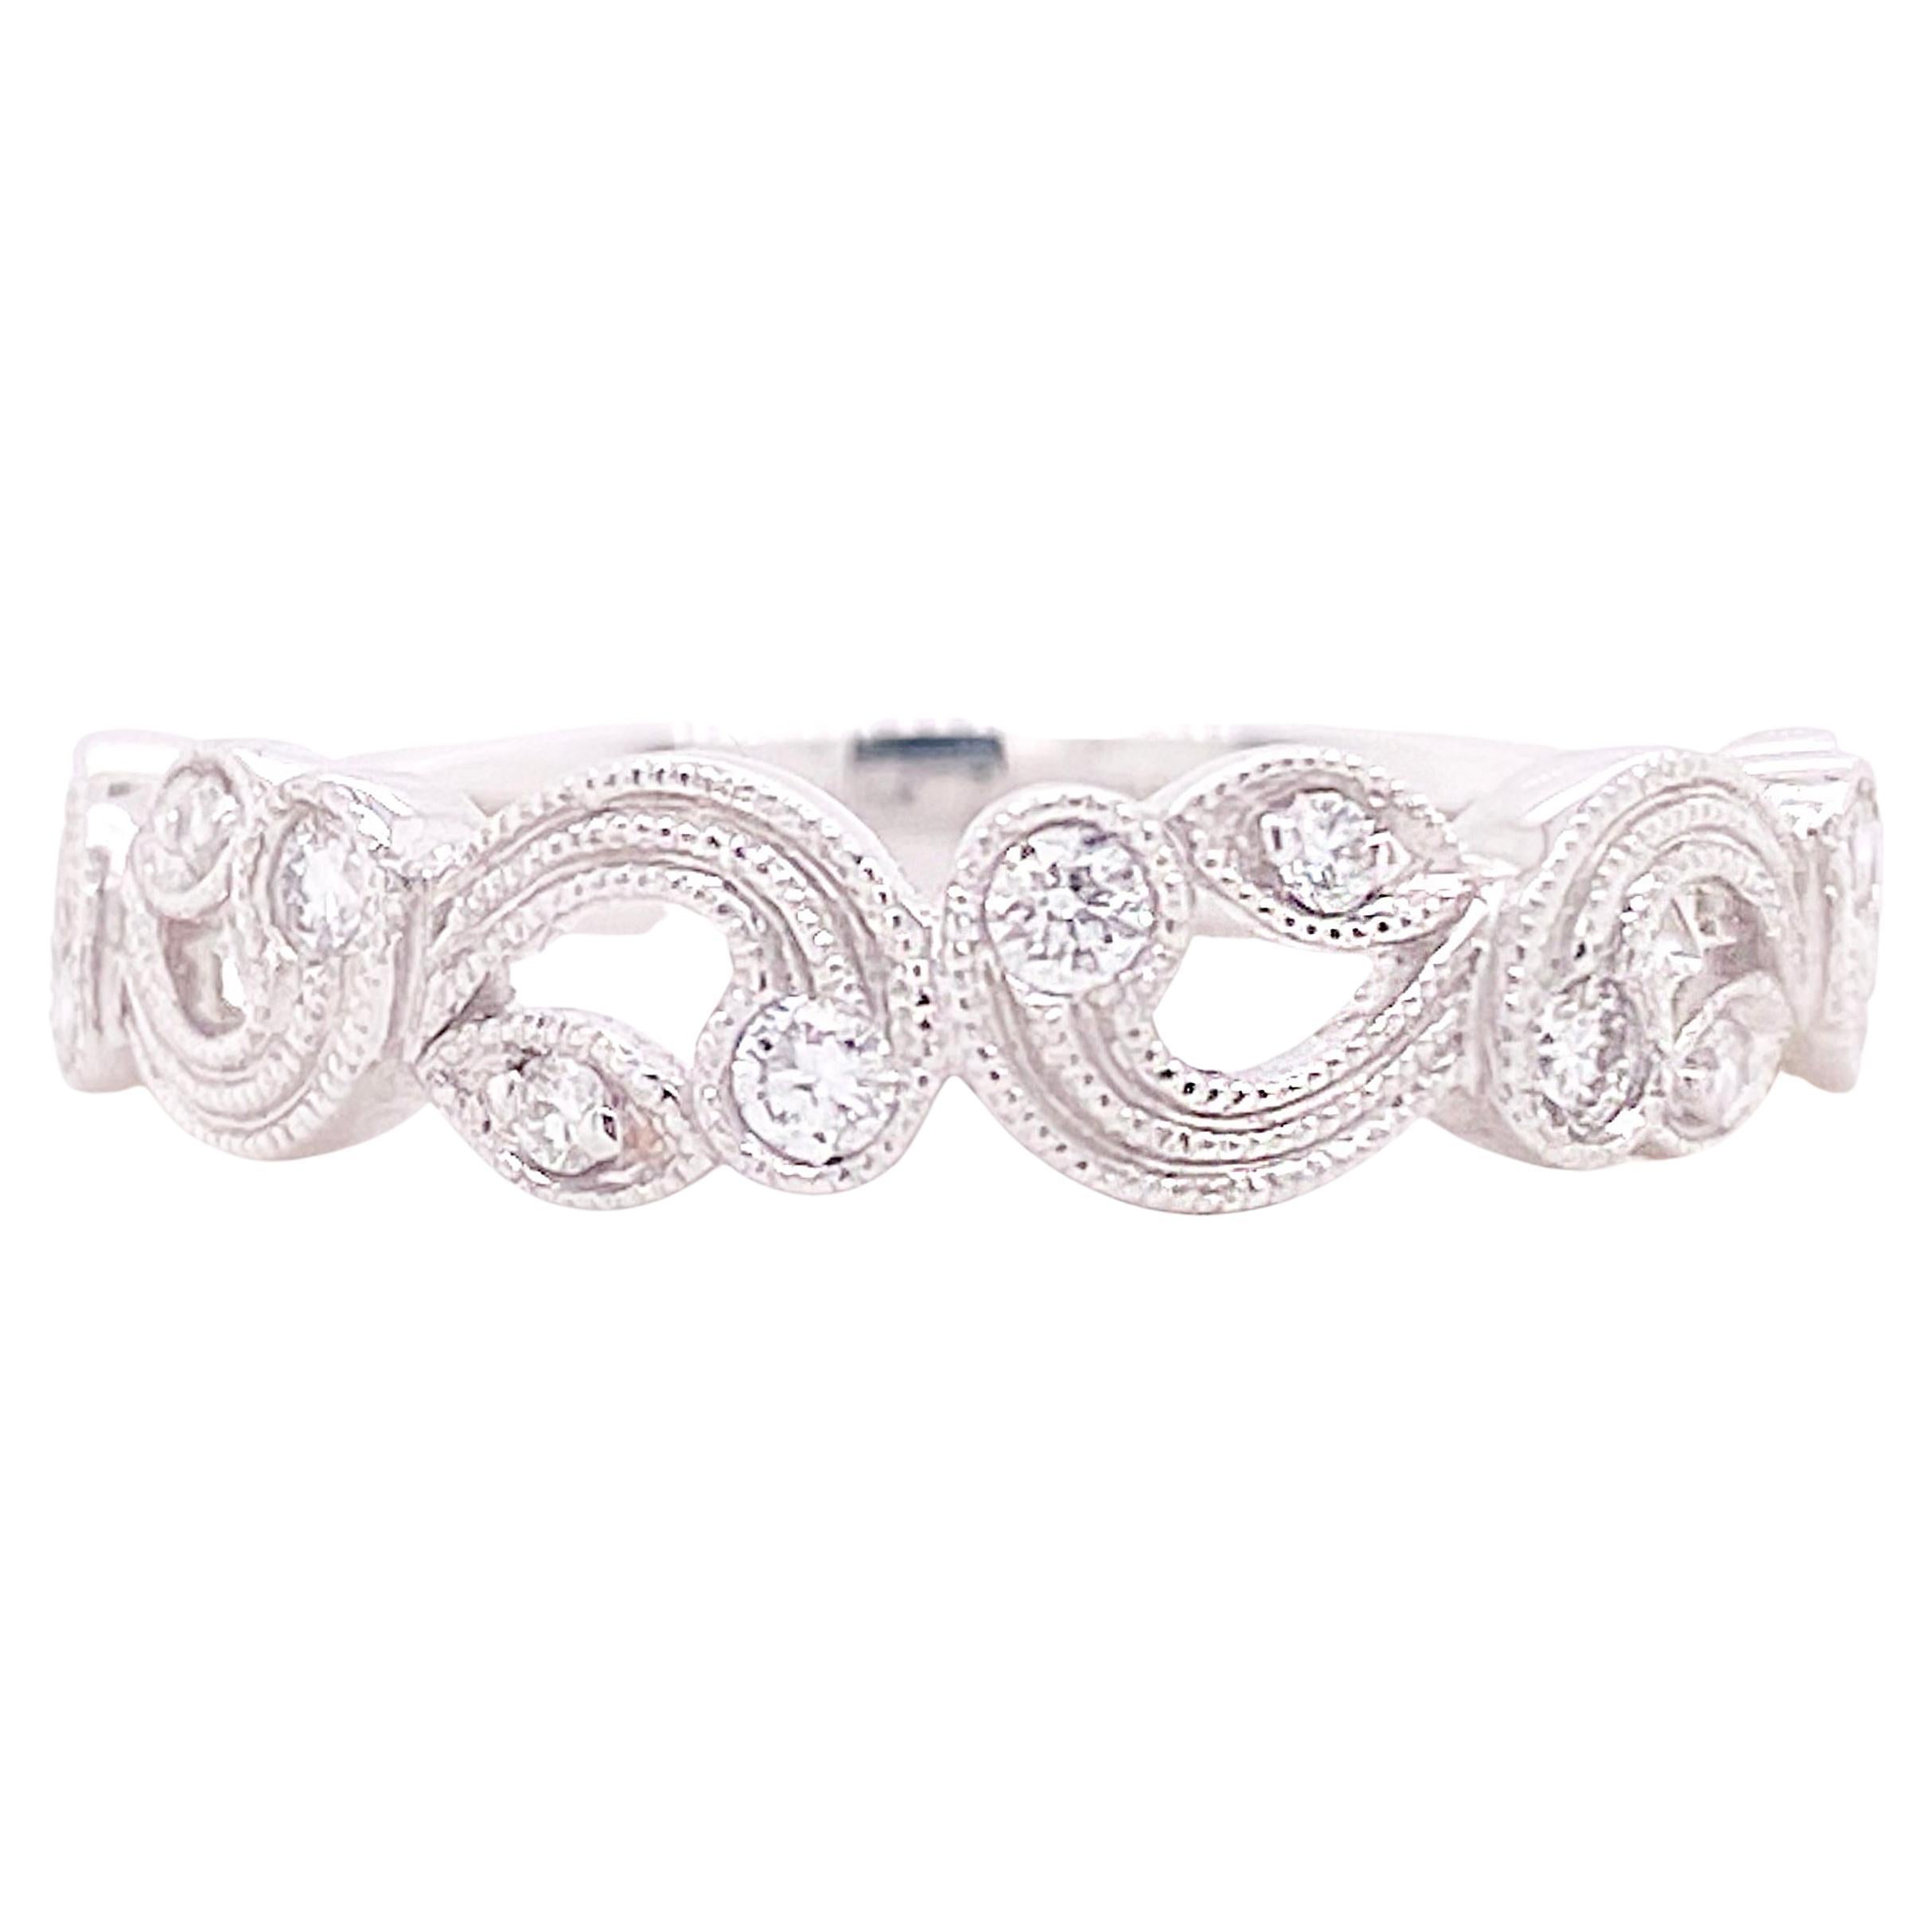 Filigree Iconic Band w Swirl Hand Engraved Detail White Gold Ring